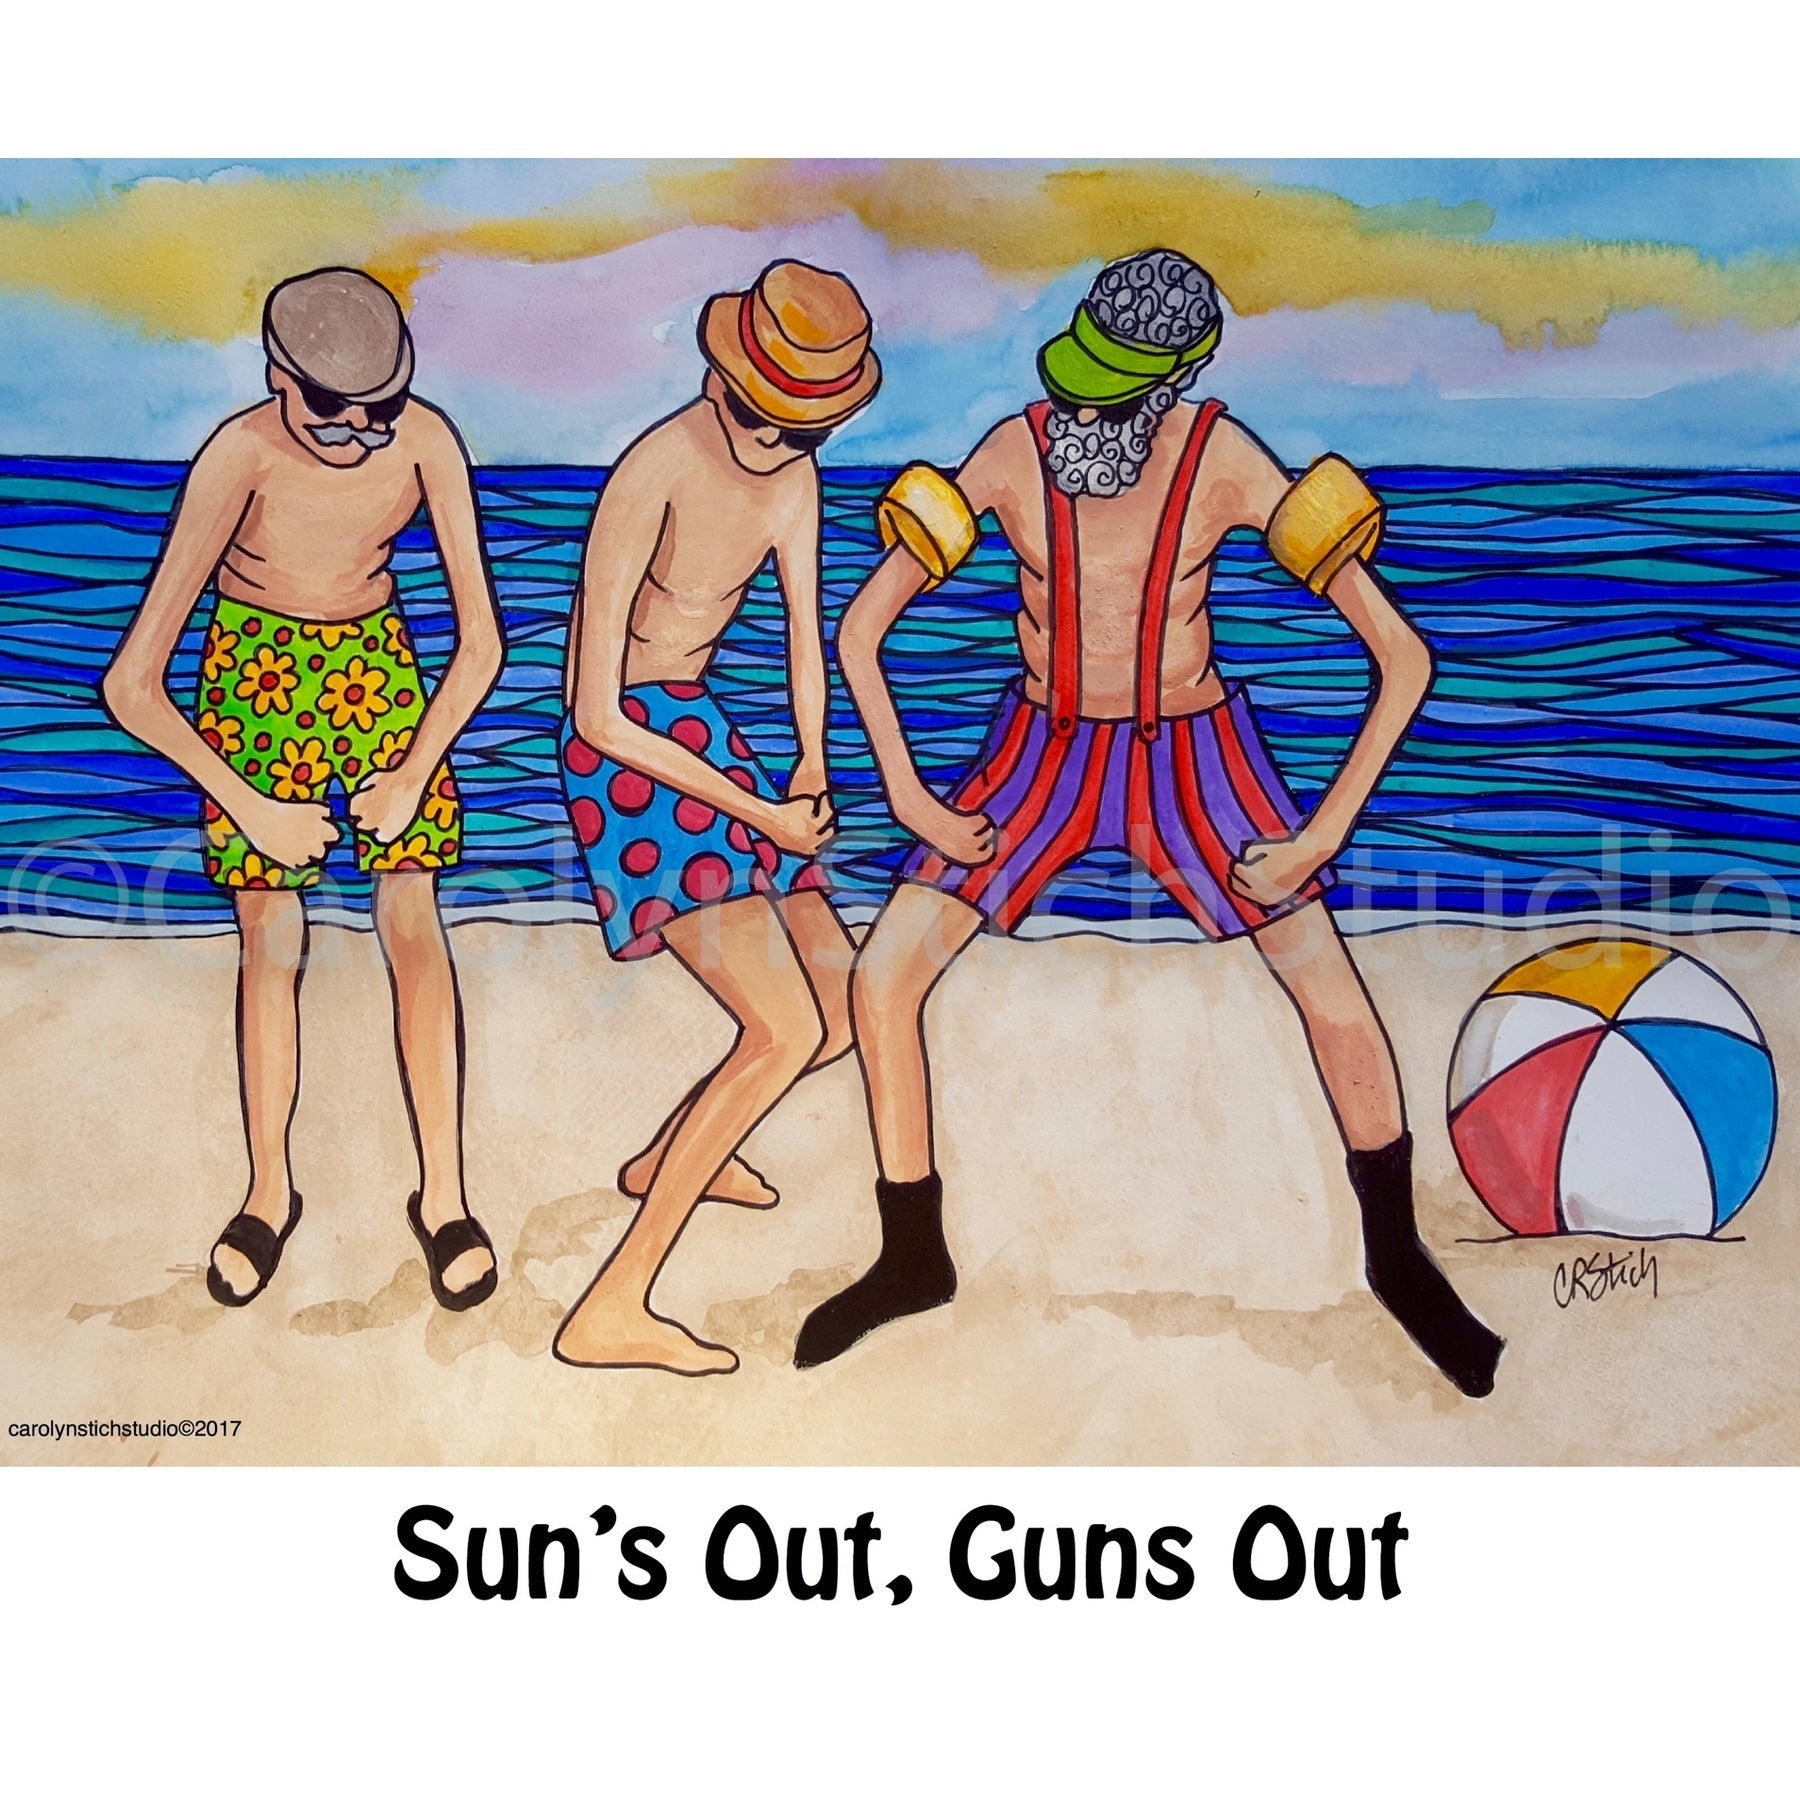 Suns Out Guns Out, rug hooking pattern